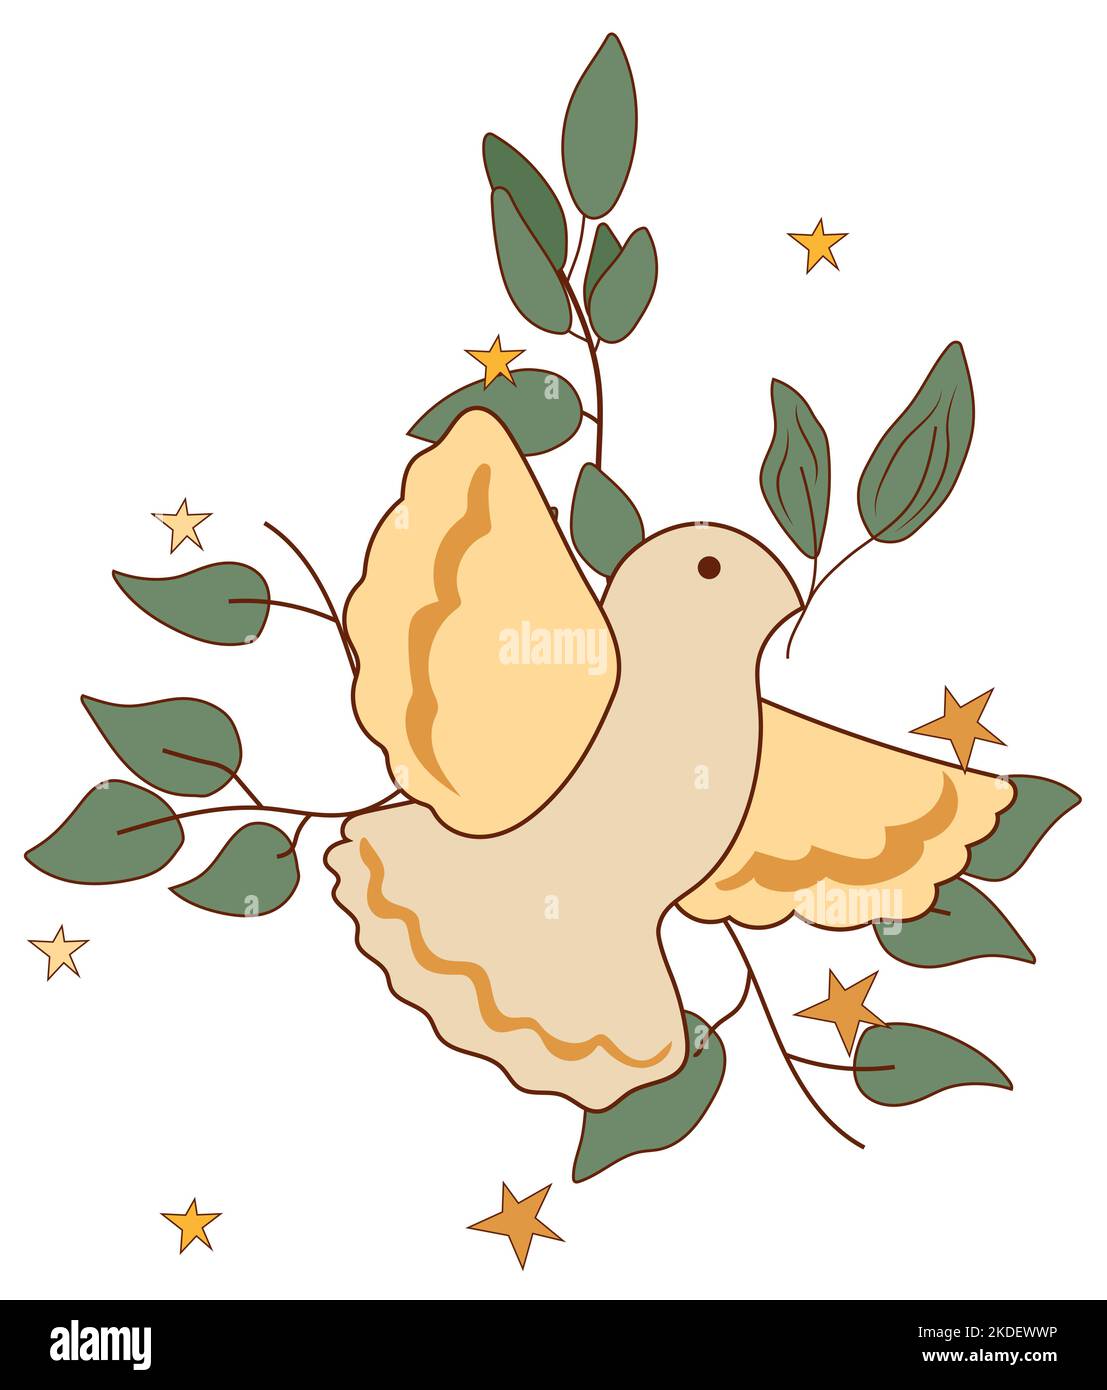 Positive composition 70s with a flying doves and green leaves around. Composition in a vintage style perfect for cards, poster, postcard, banner. Vector. Stock Vector